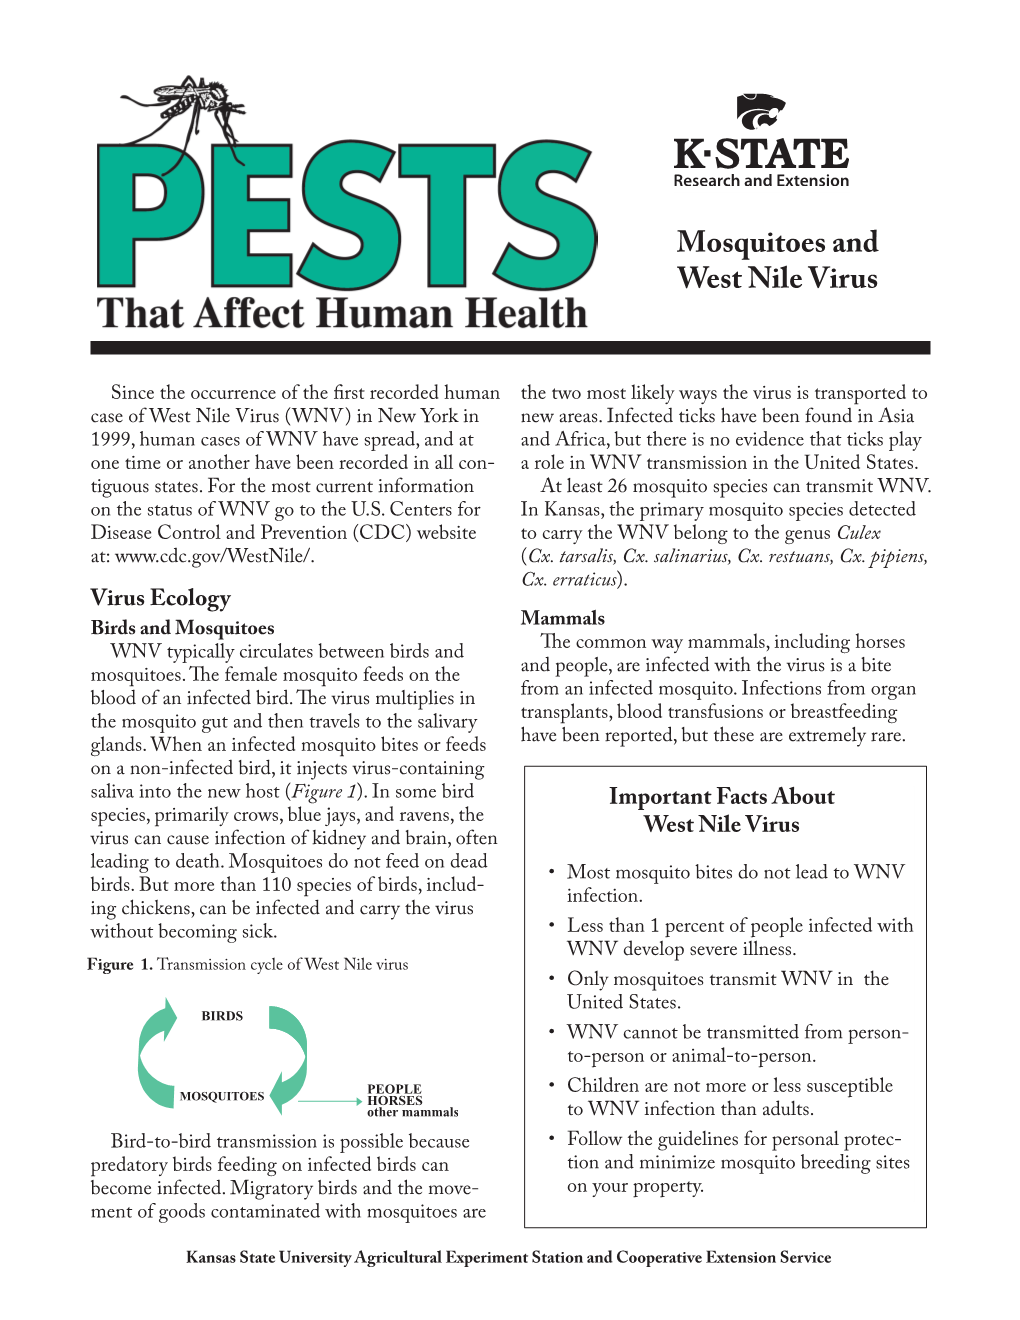 MF2571 Mosquitoes and West Nile Virus: Pests That Affect Human Health